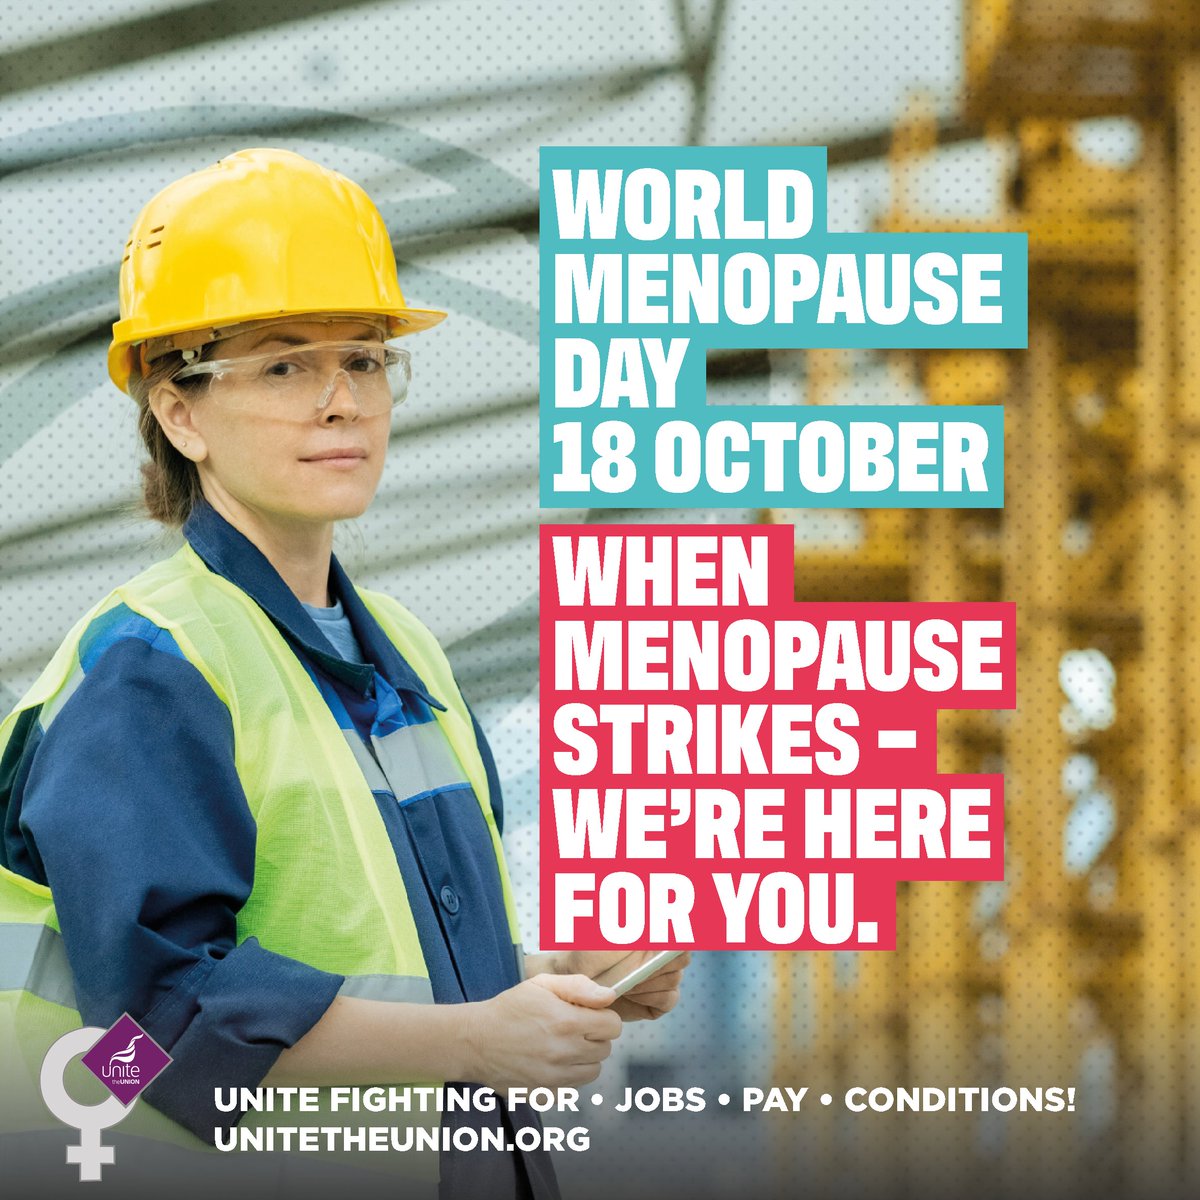 On #WorldMenopauseDay, raise awareness in your workplace! Unite is demanding employers understand their responsibilities and support menopause friendly workplaces. #MenopauseMatters More resources here 👉 unitetheunion.org/what-we-do/equ…